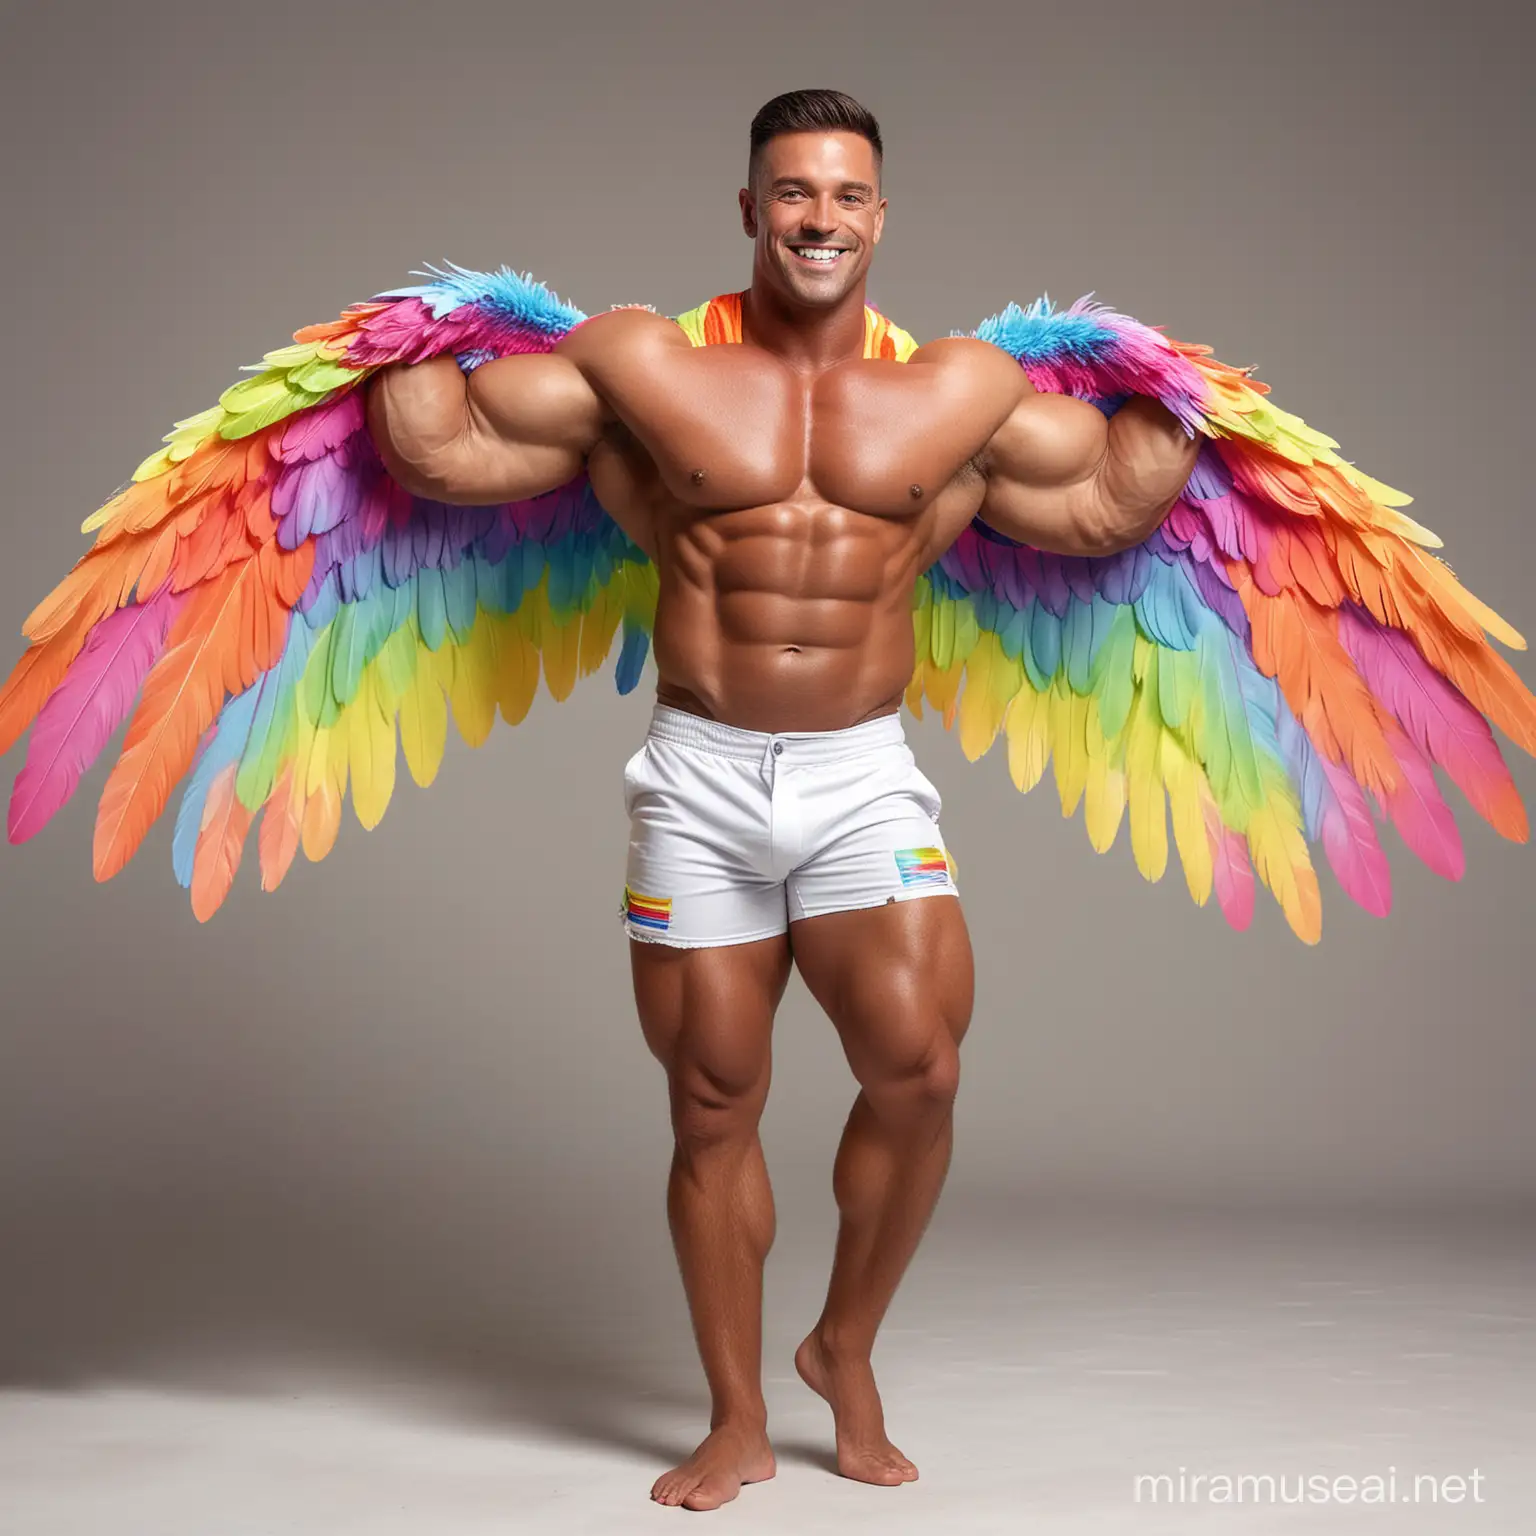 Full Body to feet Topless 30s Ultra Chunky IFBB Bodybuilder Daddy with Great Smile wearing Multi-Highlighter Bright Rainbow with white Coloured See Through Eagle Wings Shoulder Jacket Short shorts left arm up Flexing